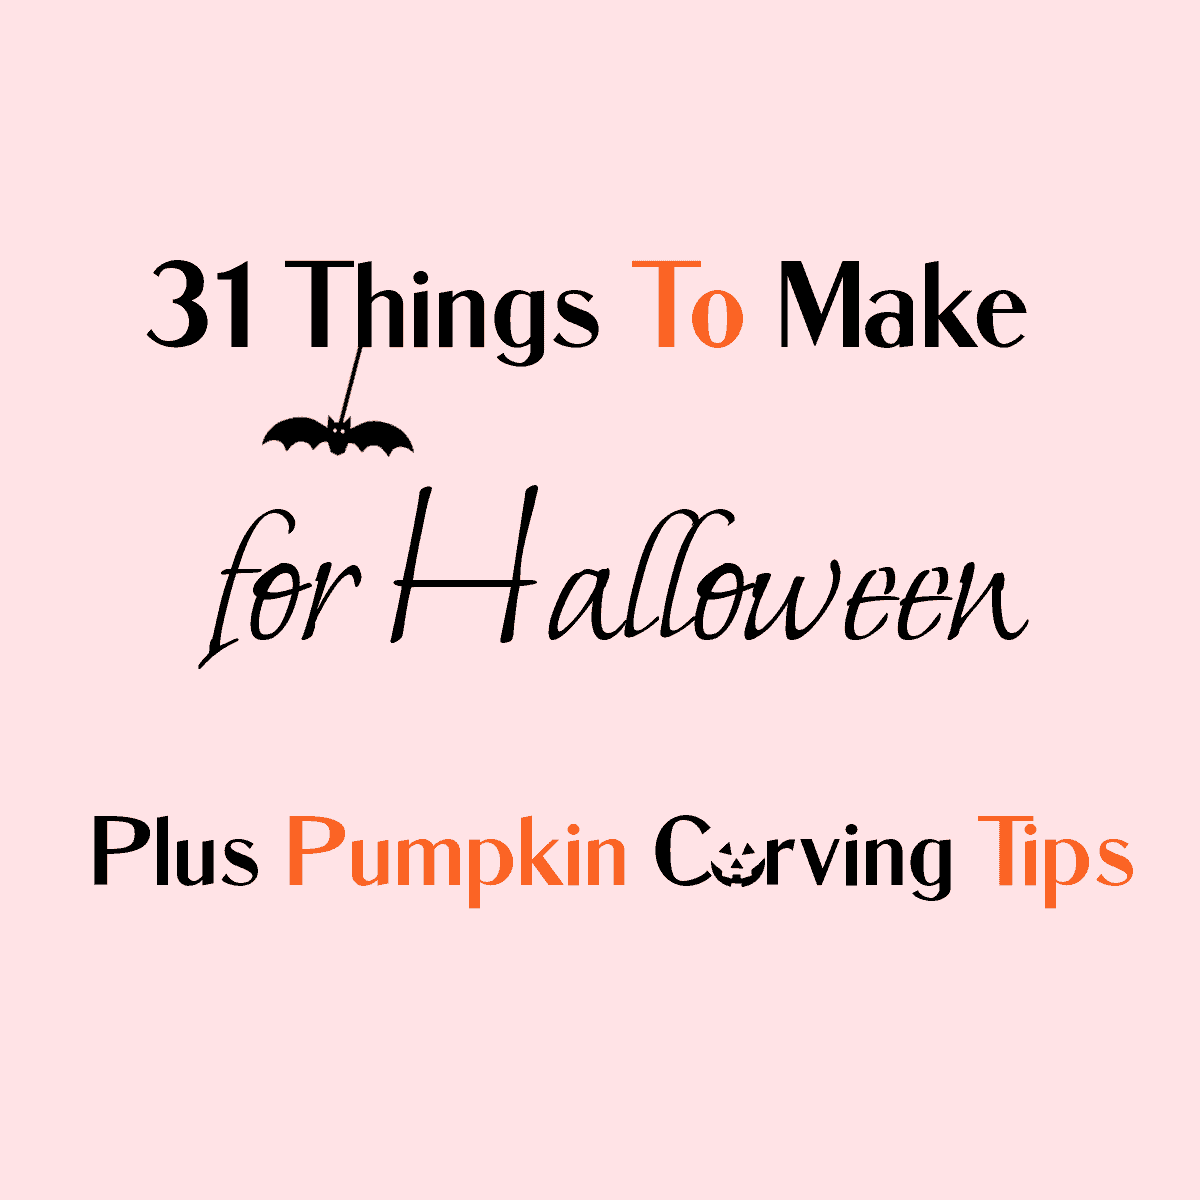 31 Things To Make For Halloween Plus Pumpkin Carving Tips